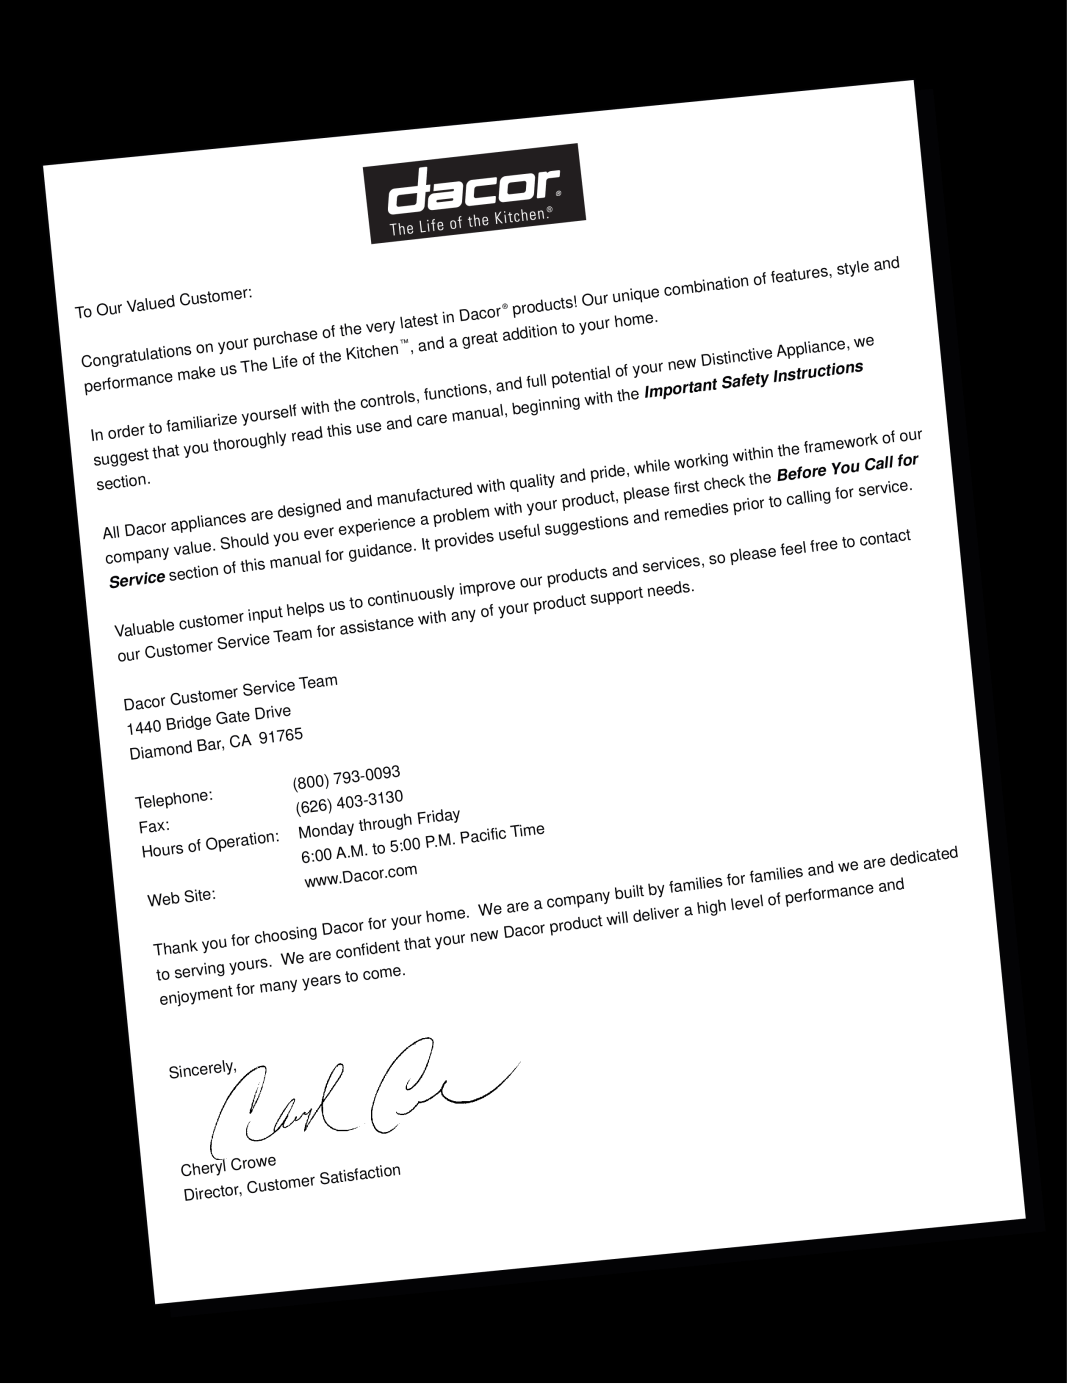 Dacor ER30DSR, ER30D-C Safety, Instructions, the Important, You Call for, the Before, Service 